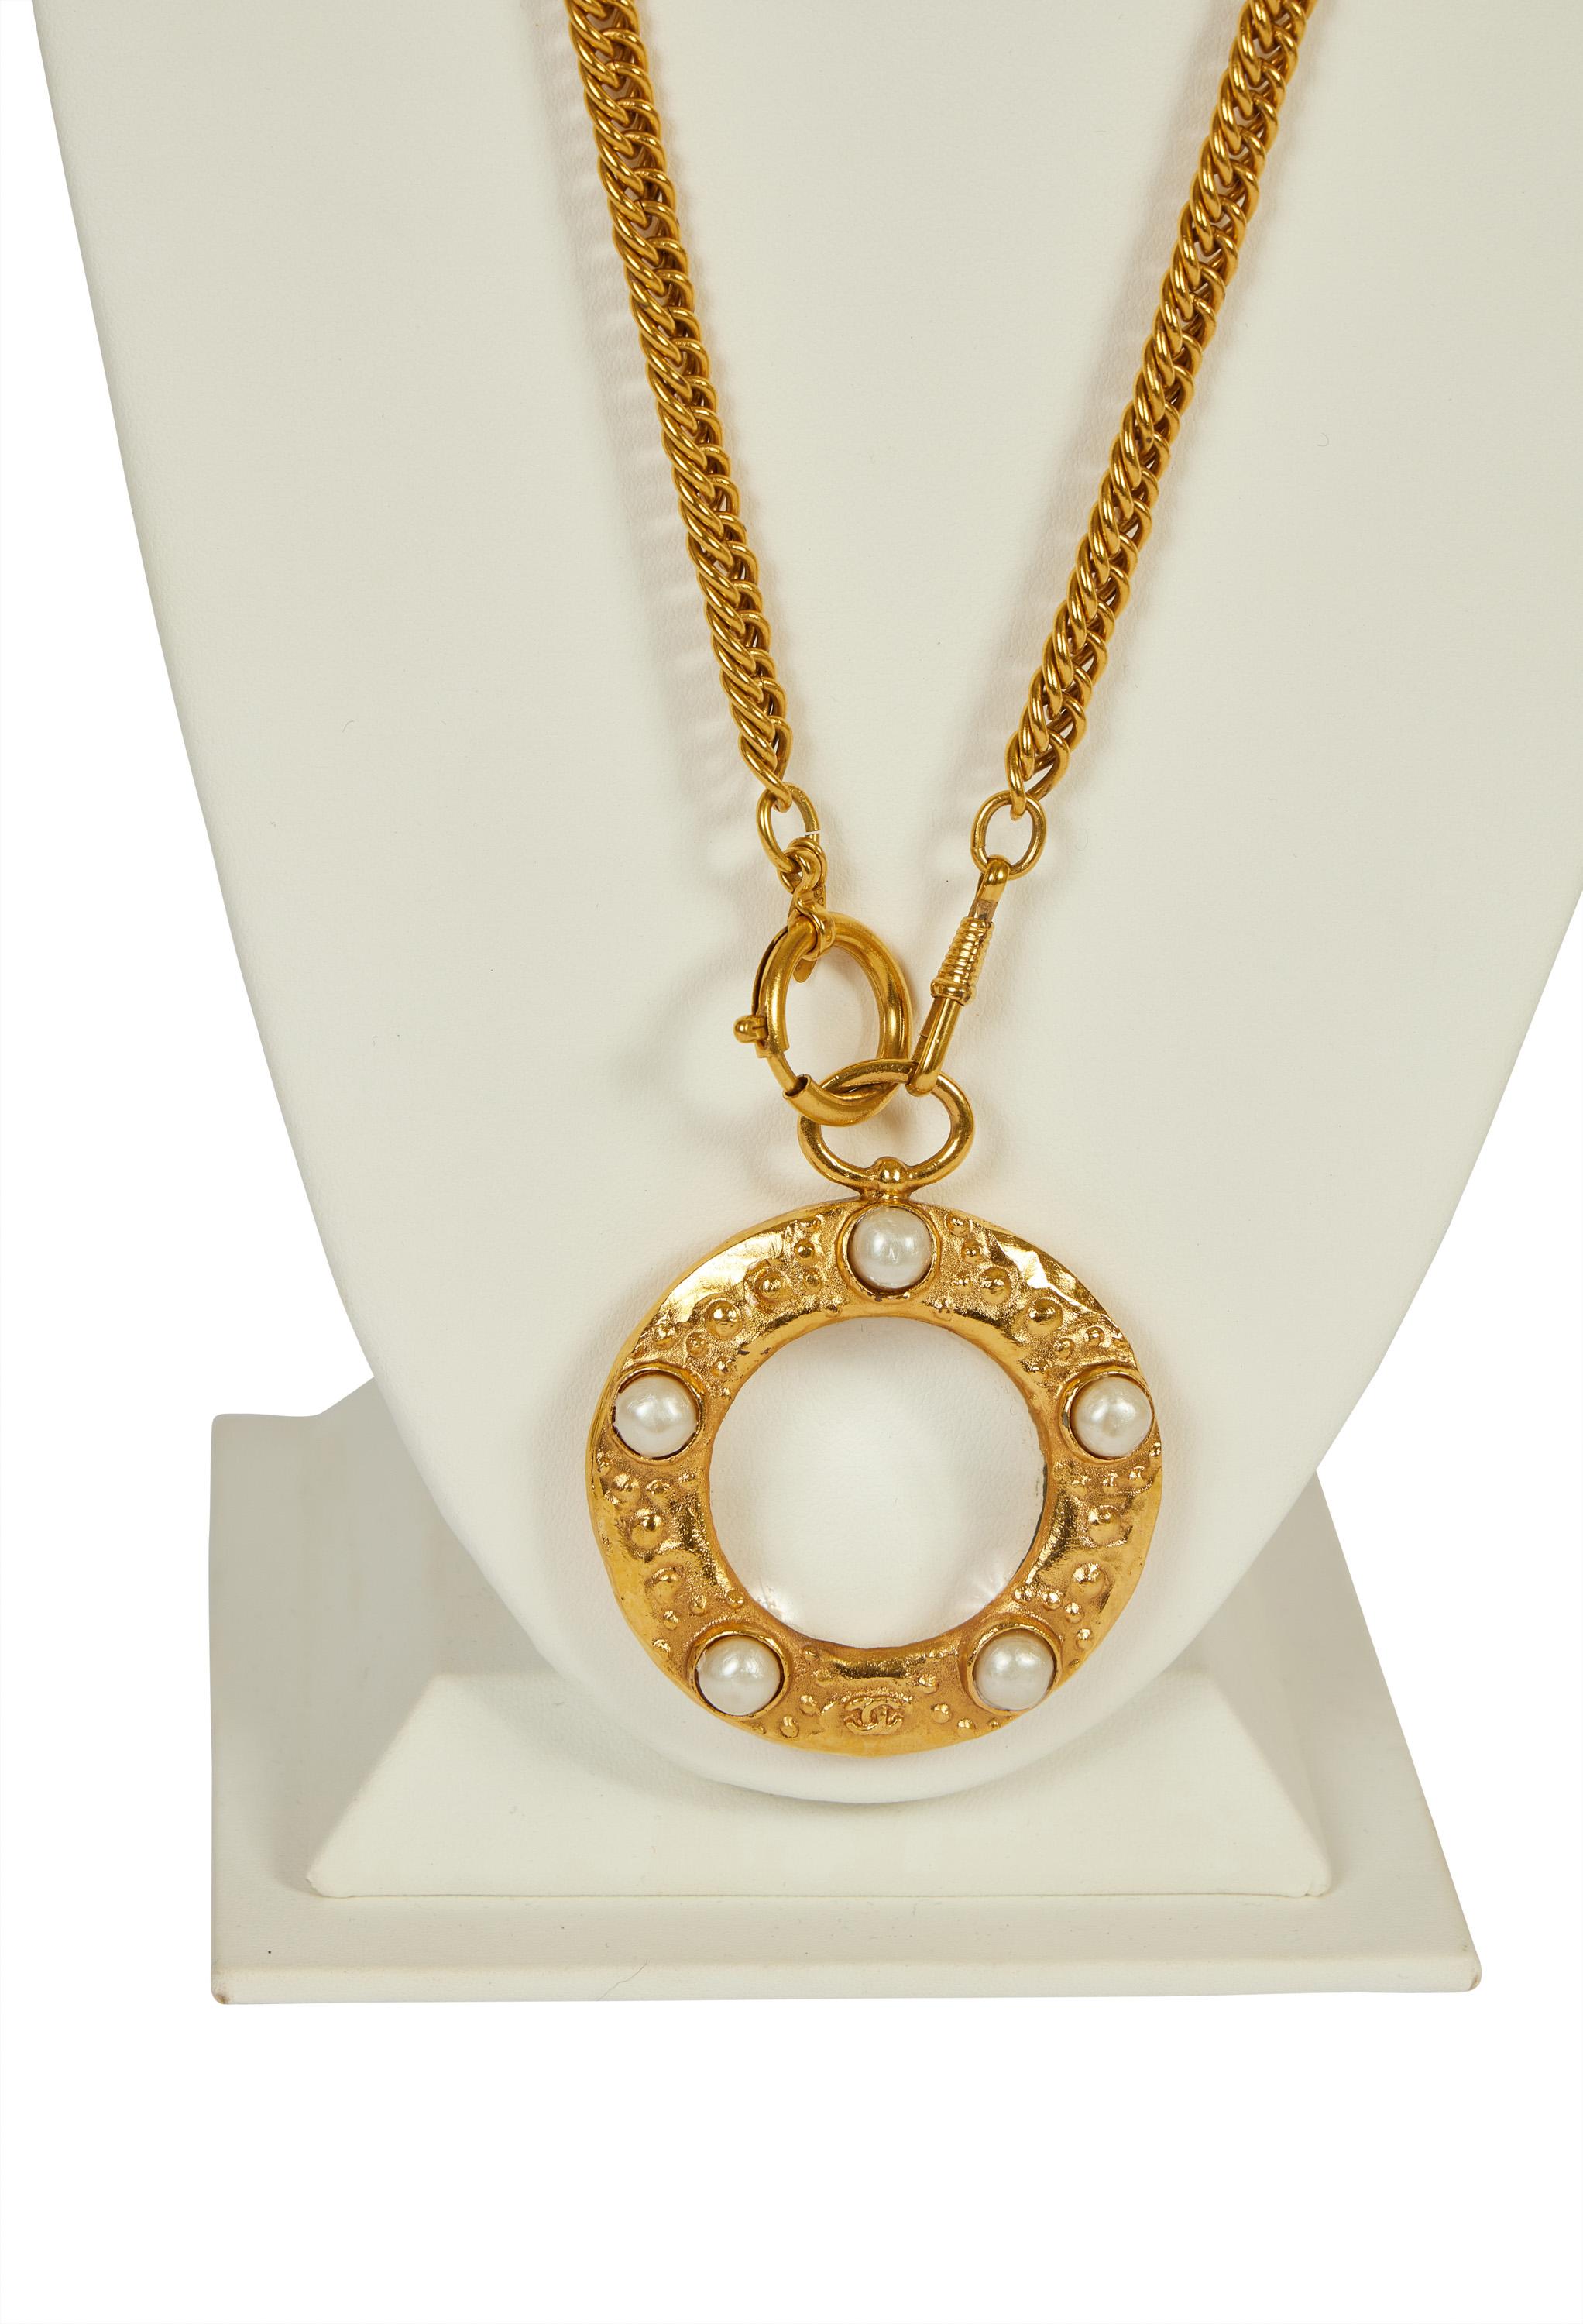 1980's Vintage Chanel Rare Pearls Magnifier Necklace In Excellent Condition For Sale In West Hollywood, CA